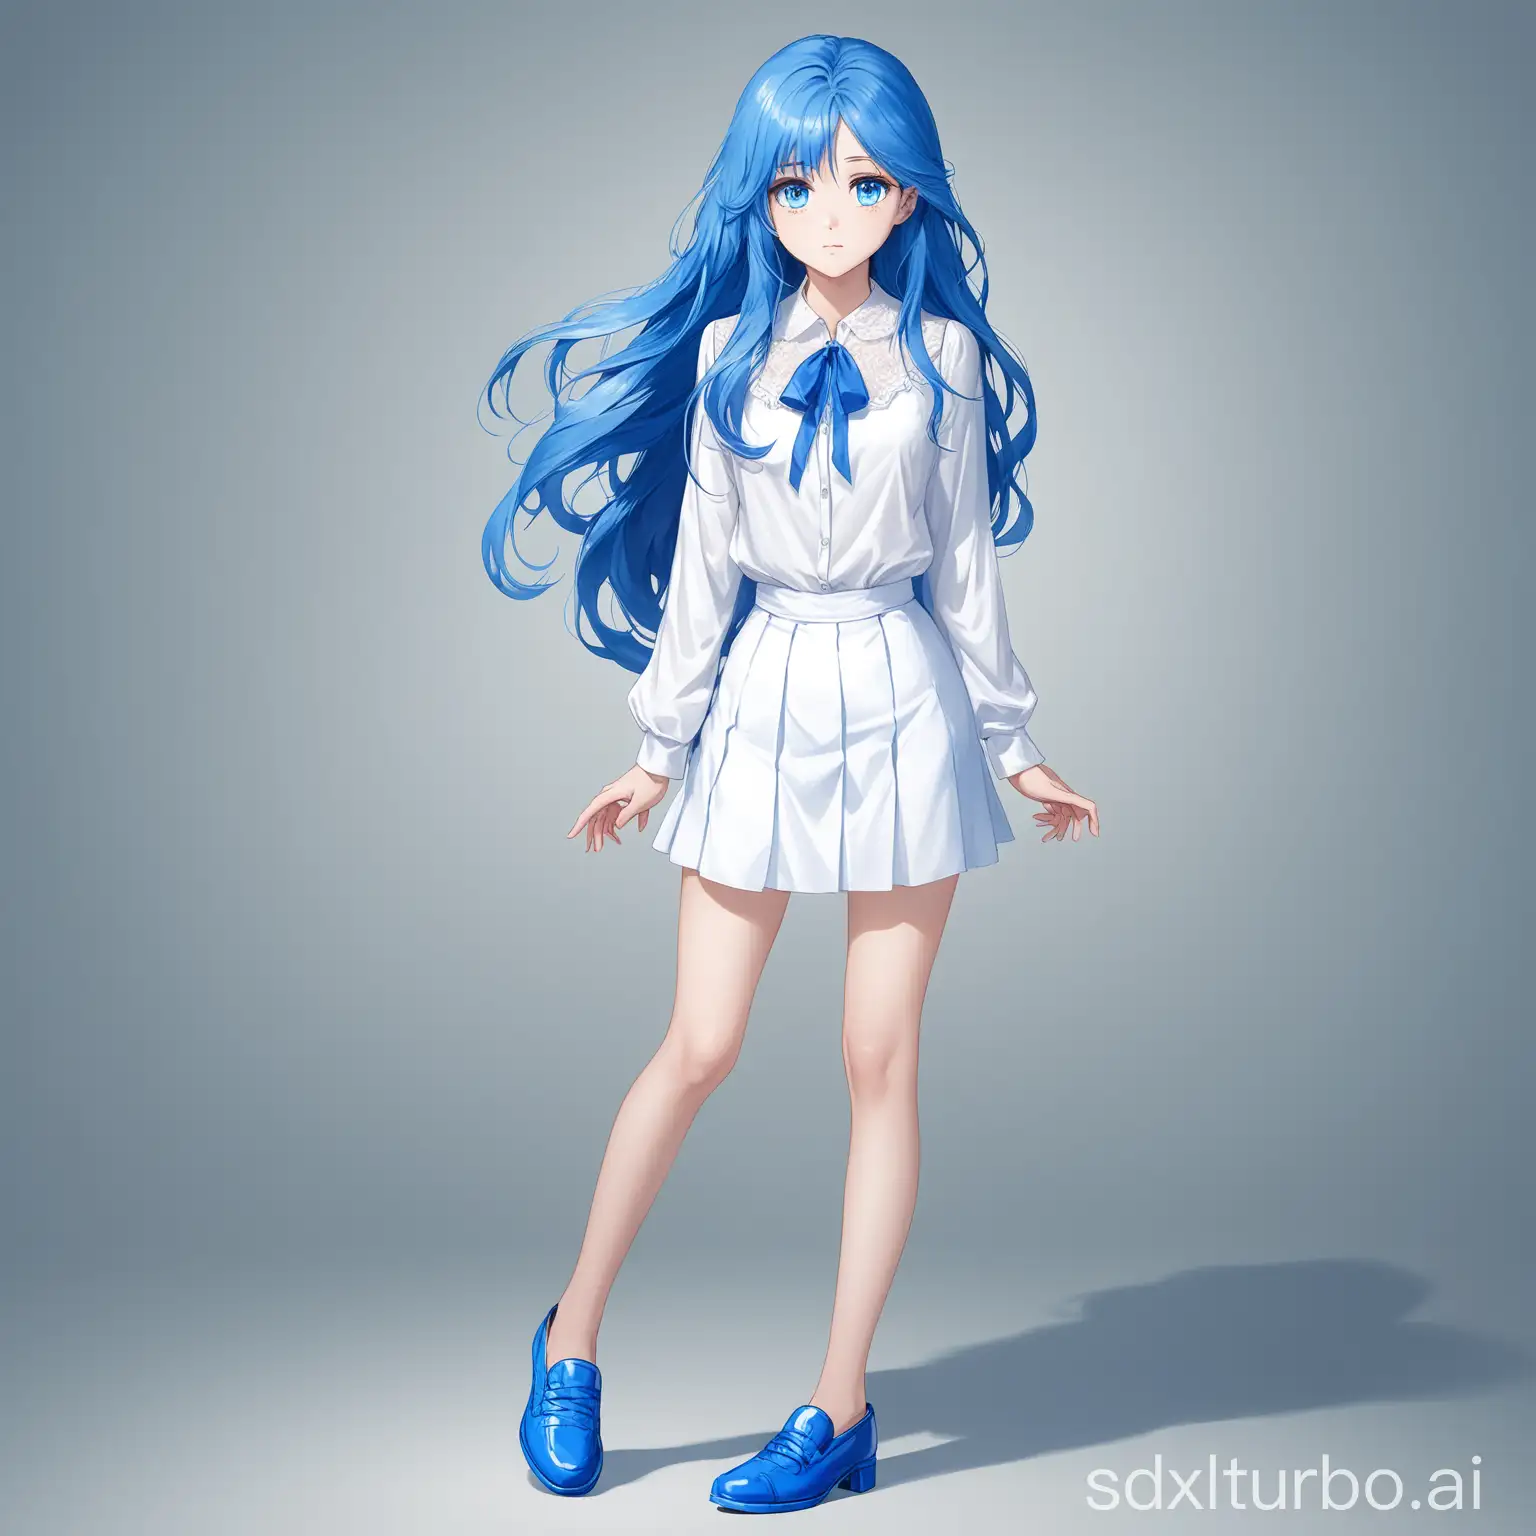 Girl-with-Blue-Long-Hair-in-White-Blouse-and-Skirt